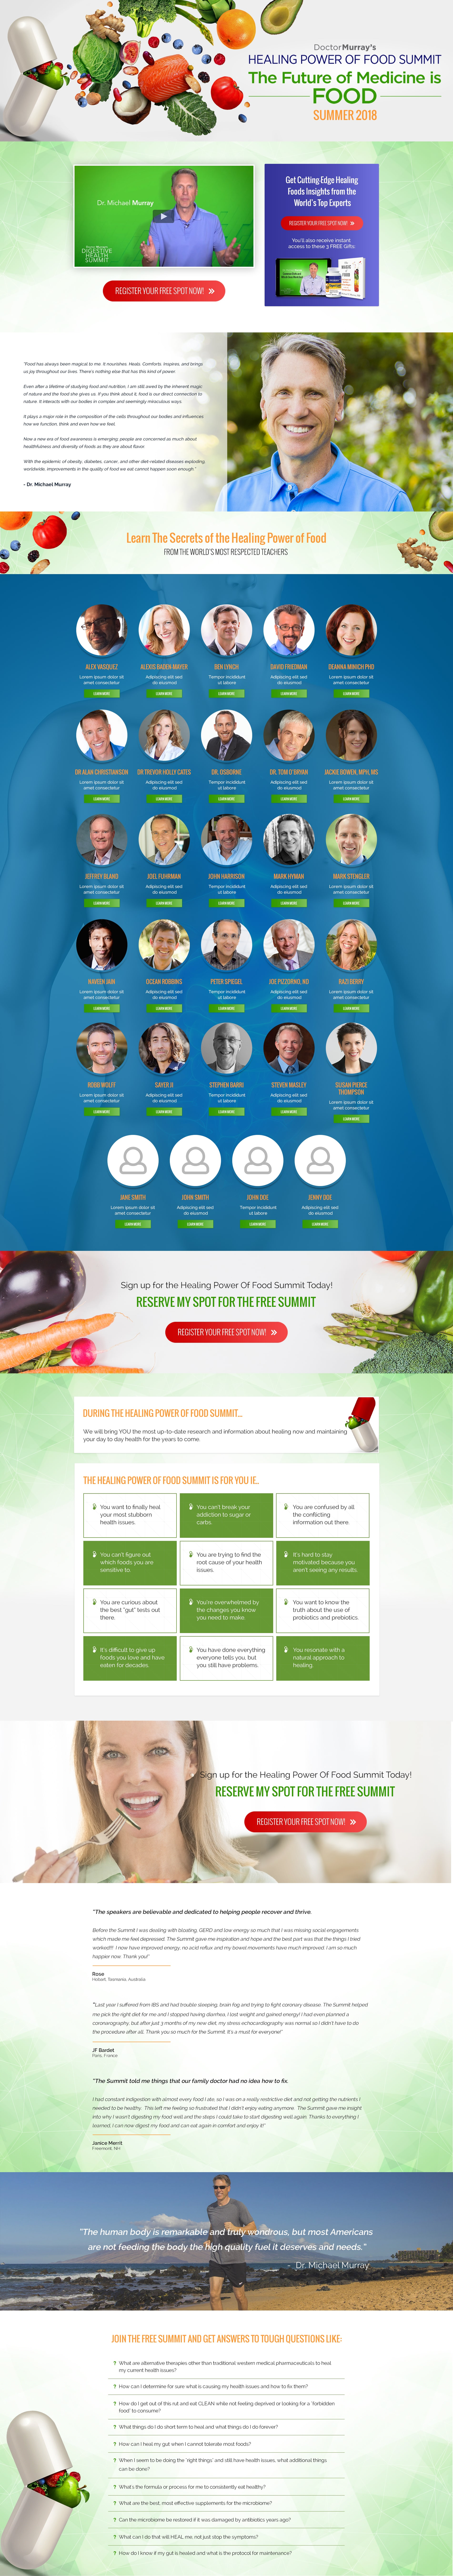 Food Summit Home Page-Part1-v3-min